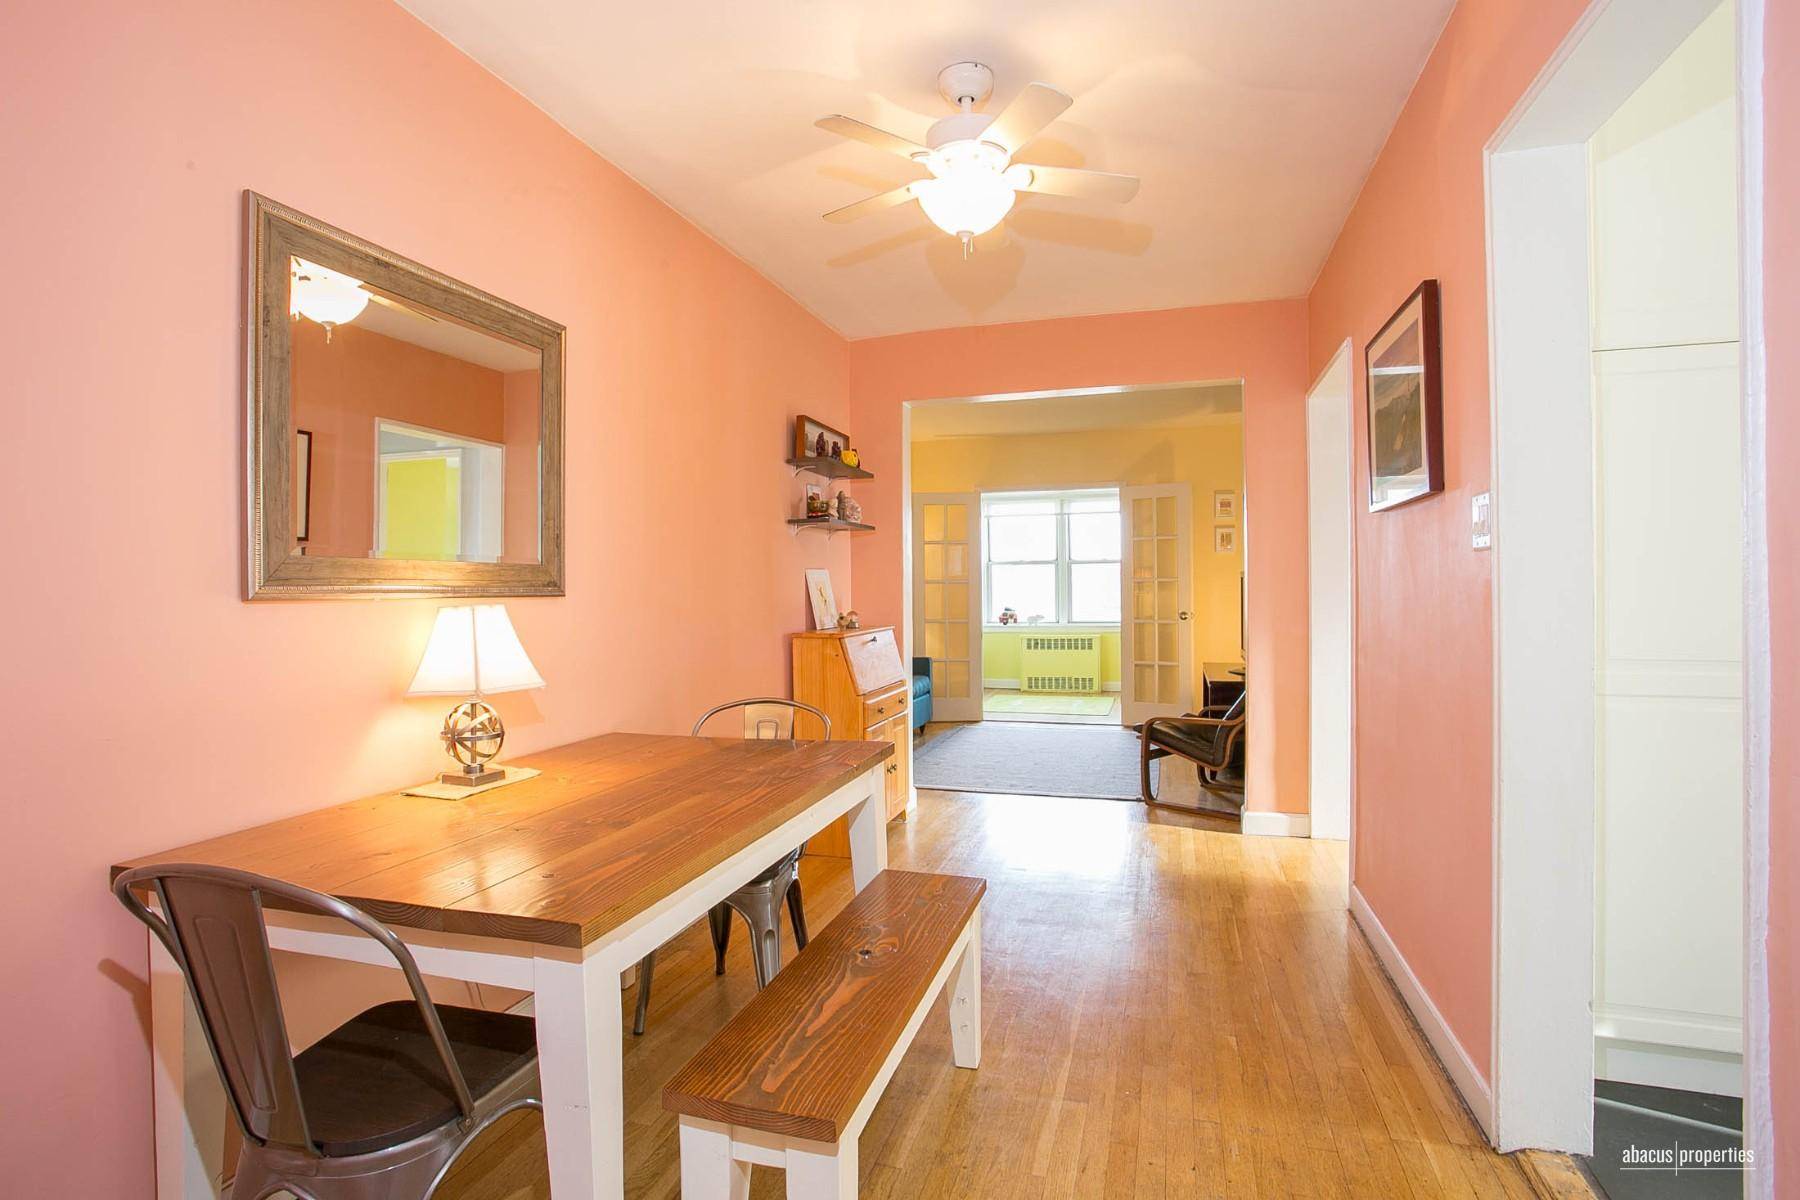 Let the sunshine in ! This lovely 1 bedroom coop is a top floor corner unit, sun drenched with both eastern and southern exposures.